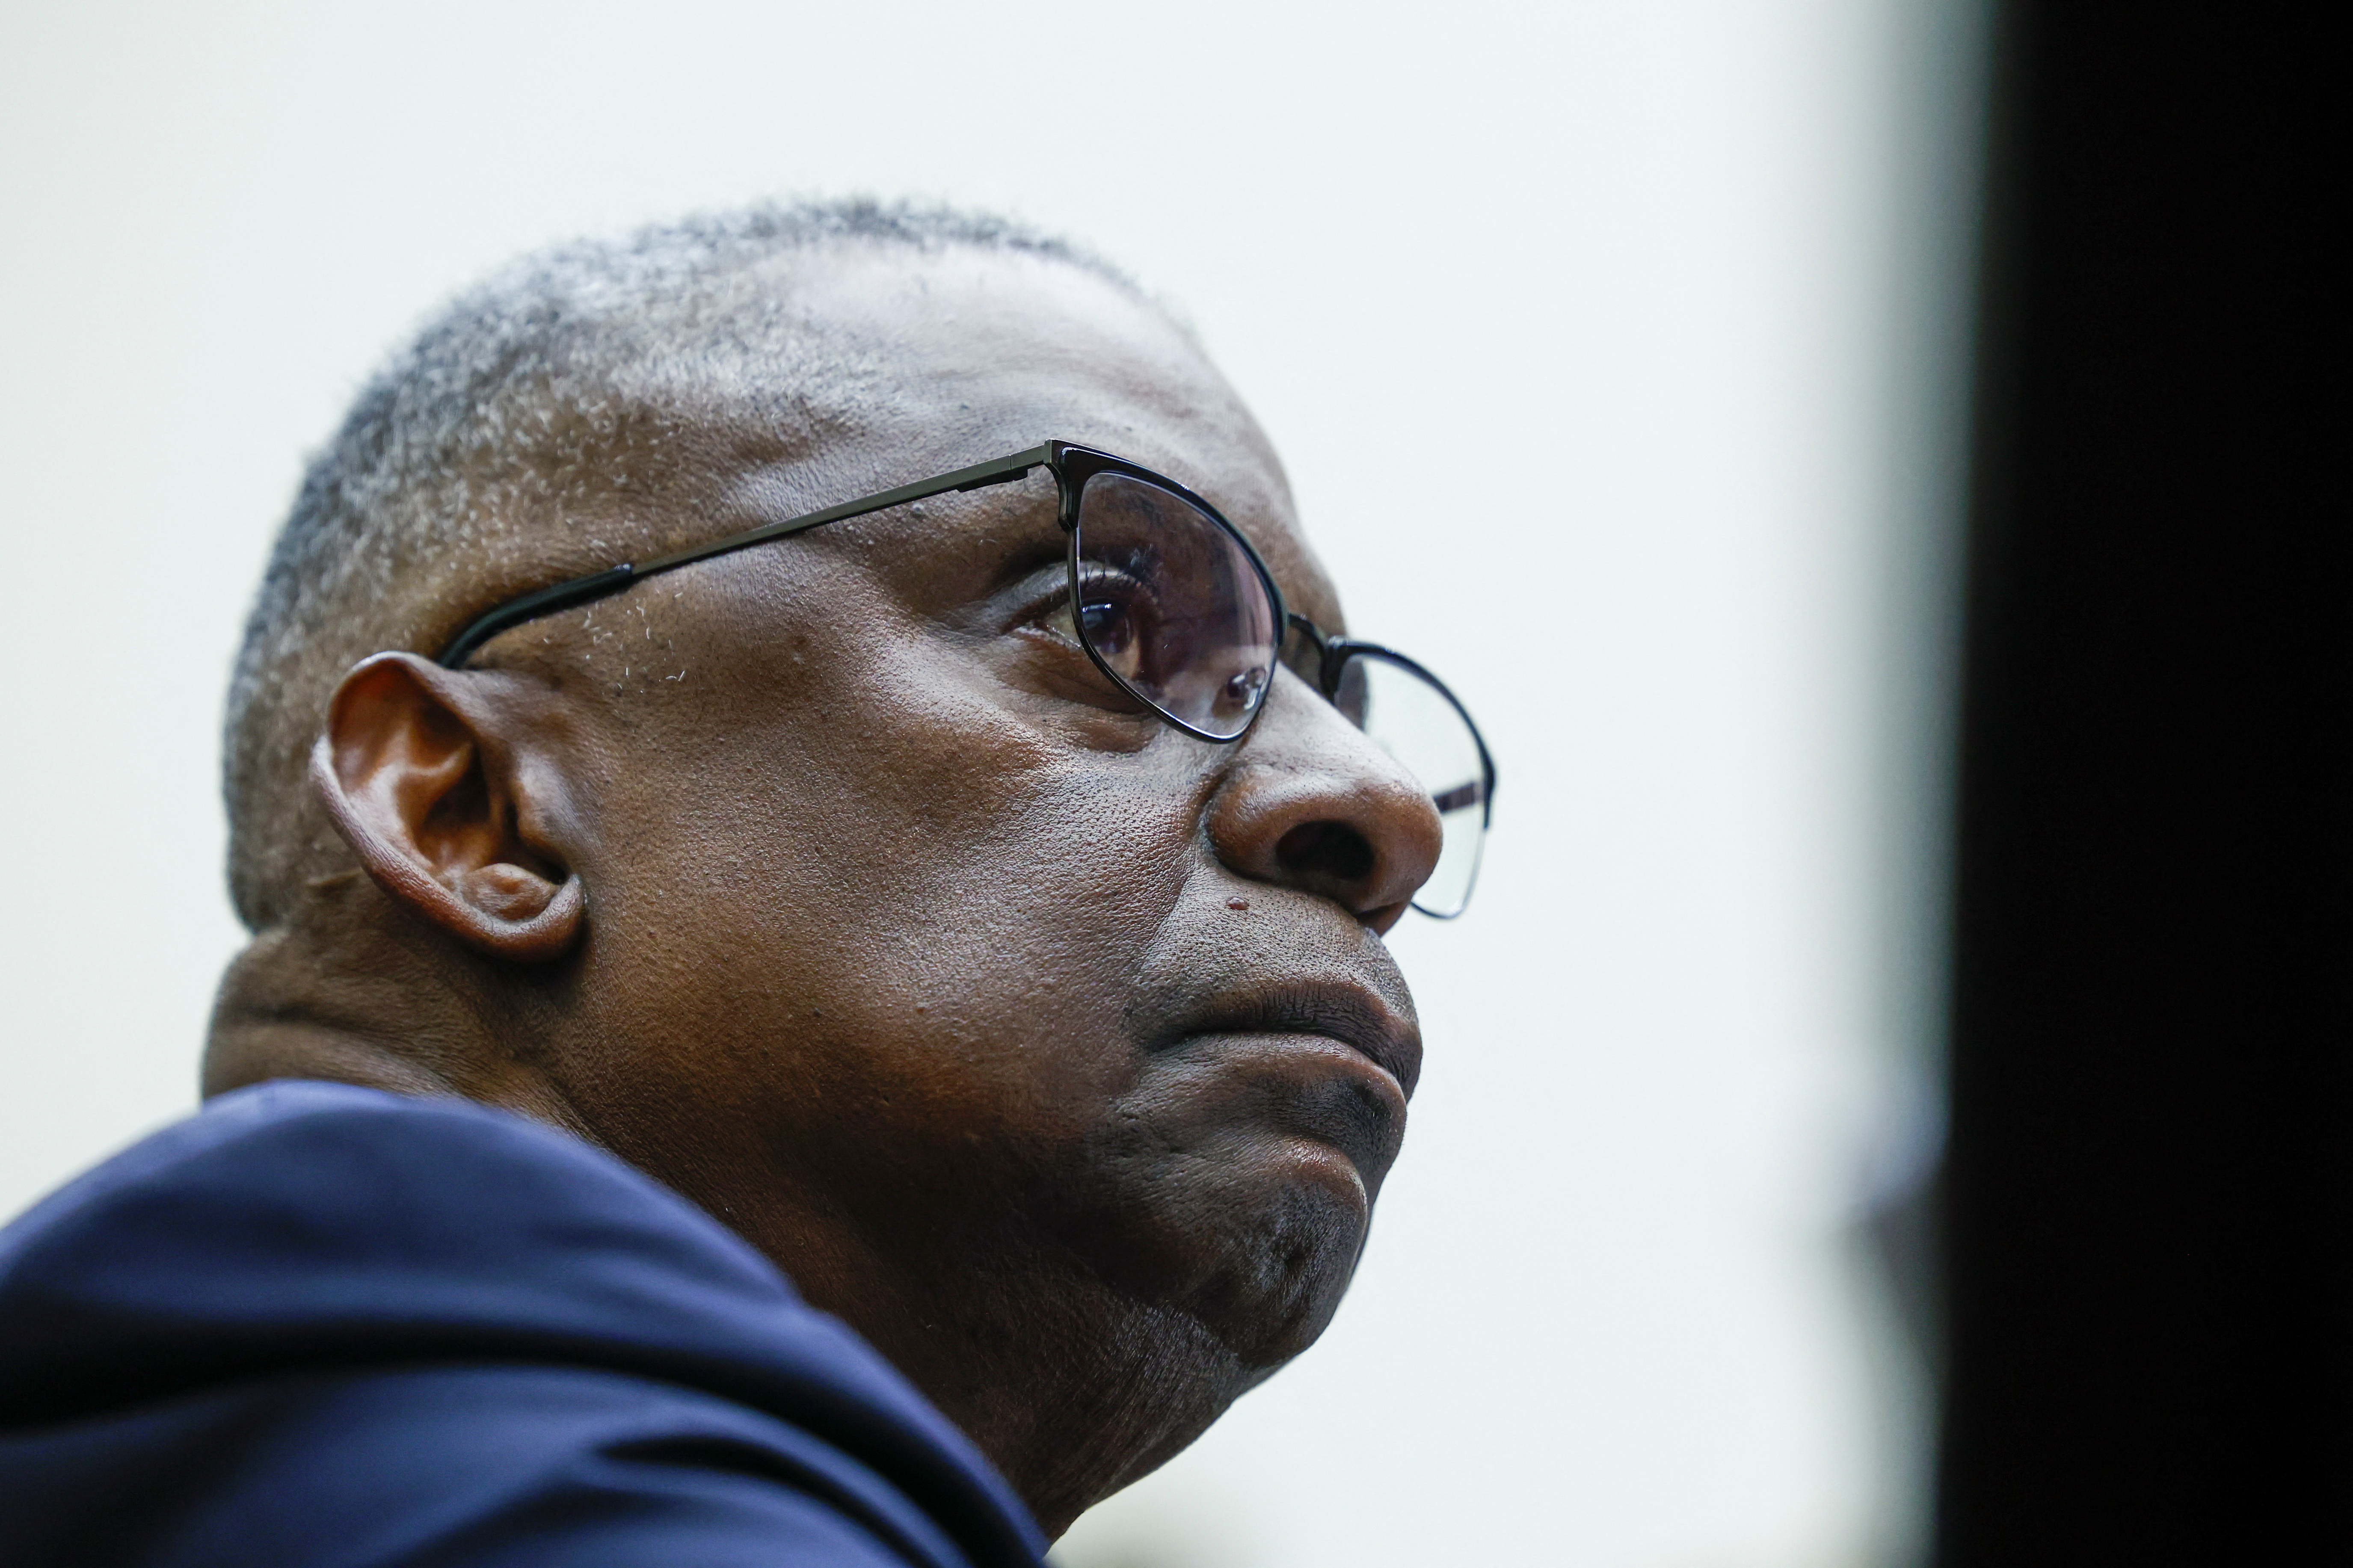 U.S. Defense Secretary Lloyd Austin testifies before a House Armed Services Committee hearing about his failure to disclose his cancer diagnosis and subsequent hospitalizations, on Capitol Hill